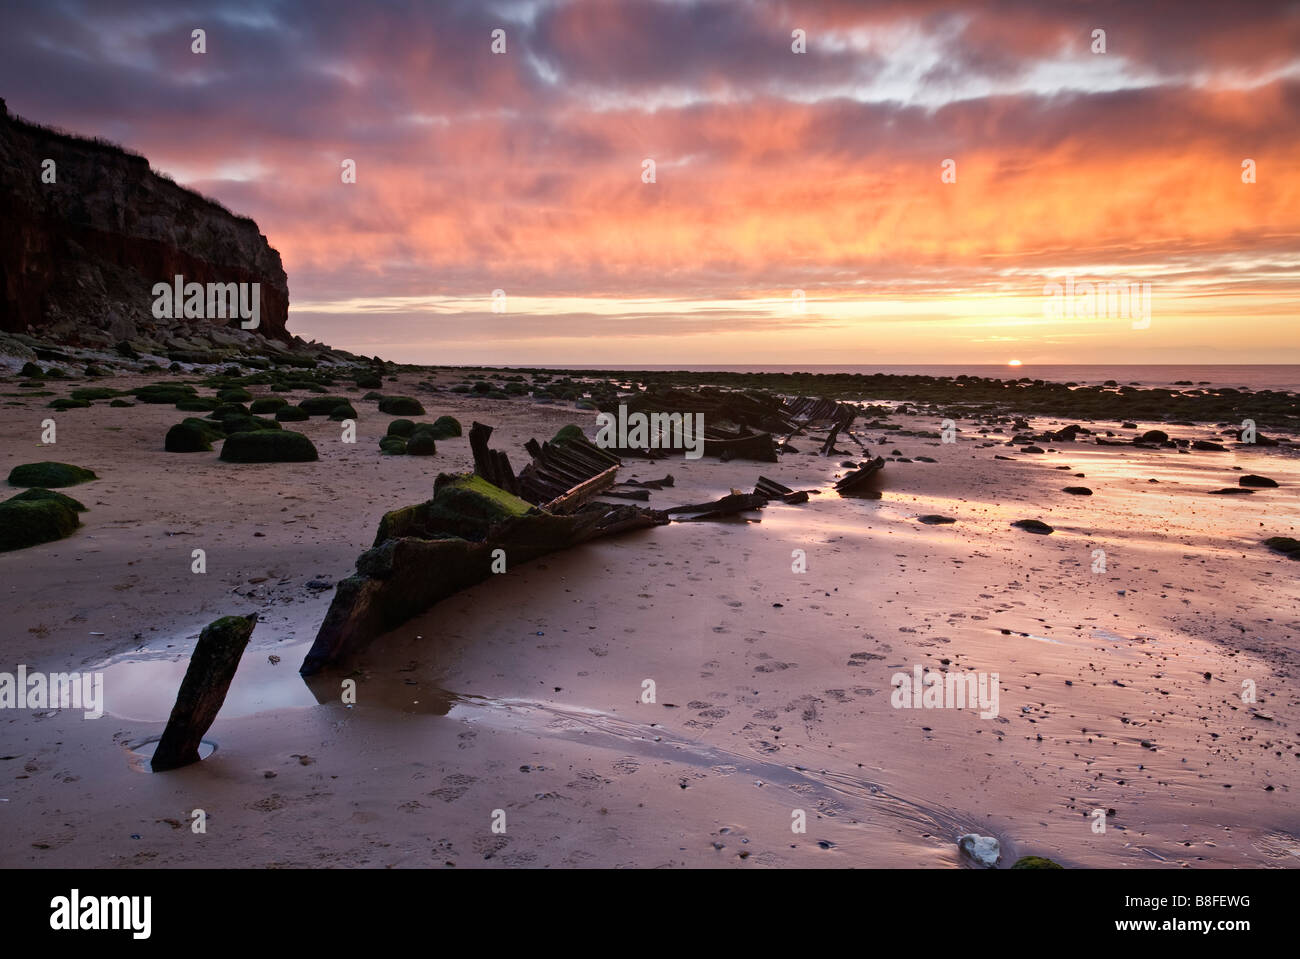 The shipwreck of the hull of the Sheraton built in 1908 and captured at sunset on the North Norfolk coast at Old Hunstanton. Stock Photo